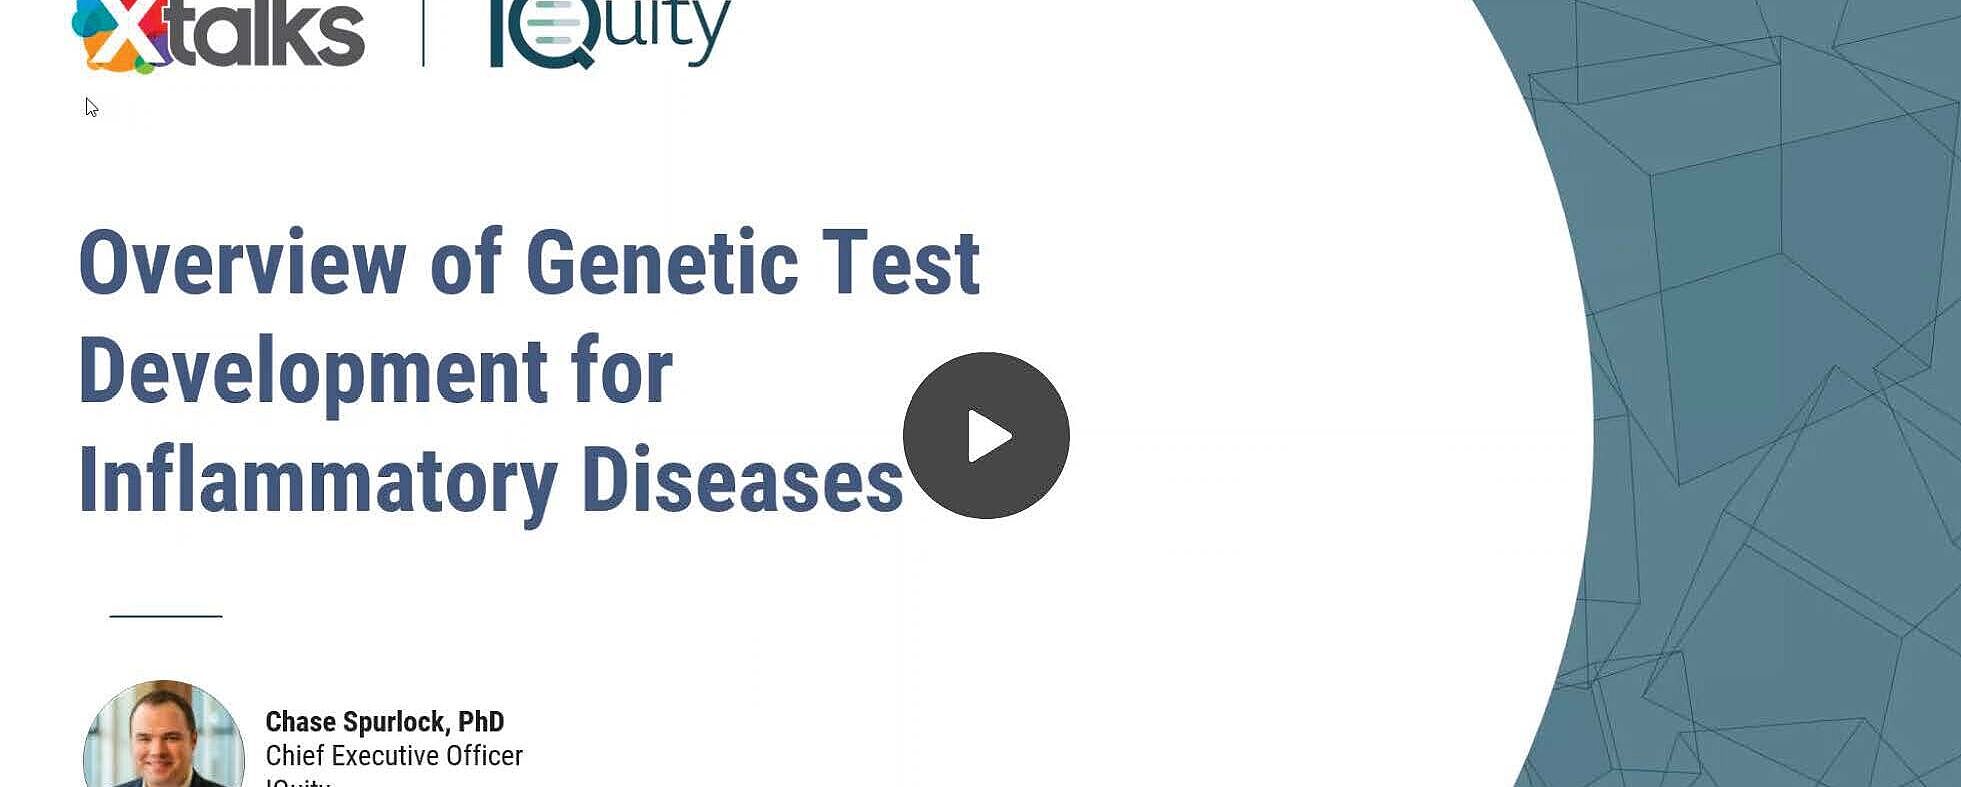 Overview of Genetic Test Development for Inflammatory Diseases